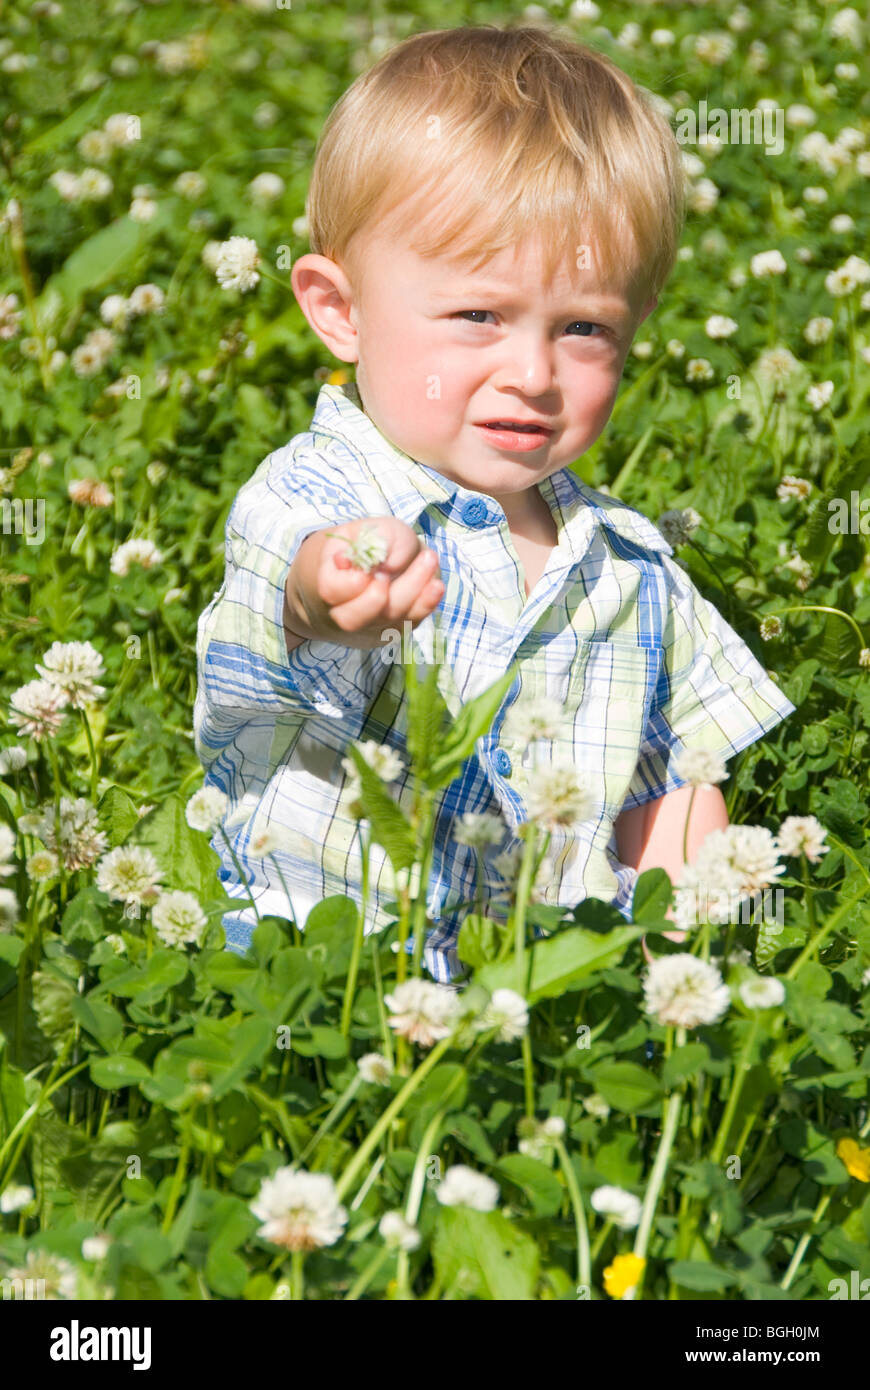 Little Boy Aged 14 Months Sitting Amongst White Clover Flowers on Summer Day Stock Photo